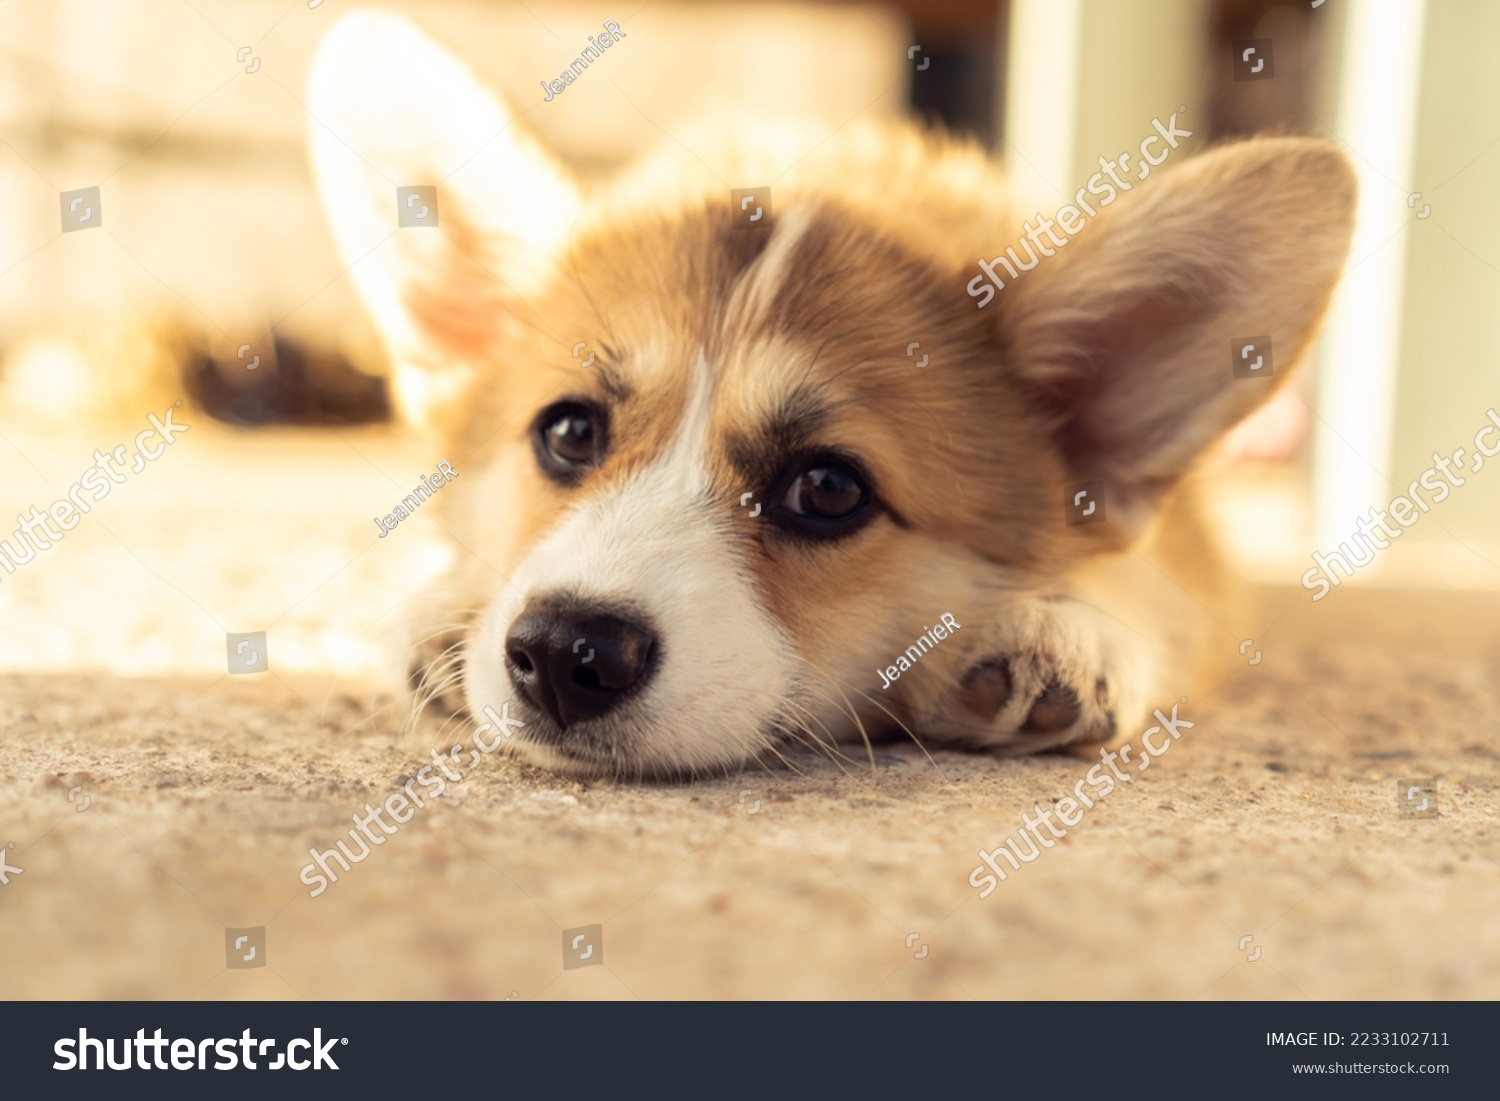 Tired little corgi dog lie on ground outdoors with sad eyes. Closeup photo. Purebred pet, domestic animal, beautiful dog breed with big prick ears. Fluffy puppy rest in house yard on sunny day. #2233102711